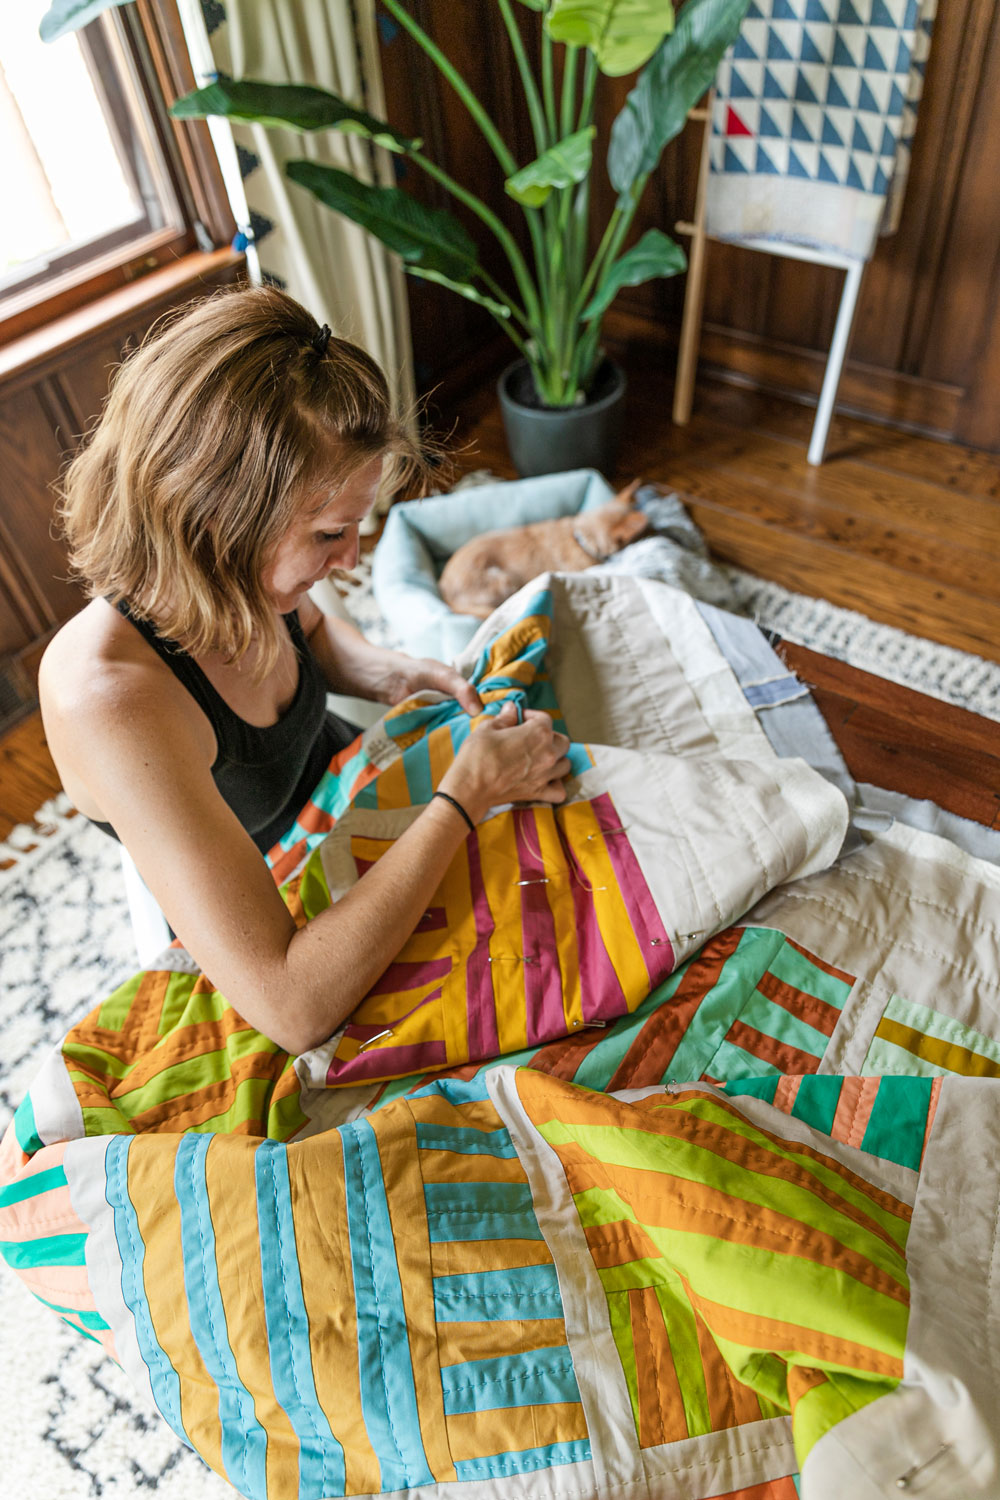 The Shine quilt sew along includes lots of added tips and videos to help you make this modern quilt pattern. This fat quarter quilt pattern is beginner friendly and focuses on improv sewing. suzyquilts.com #modernquilt #quilting